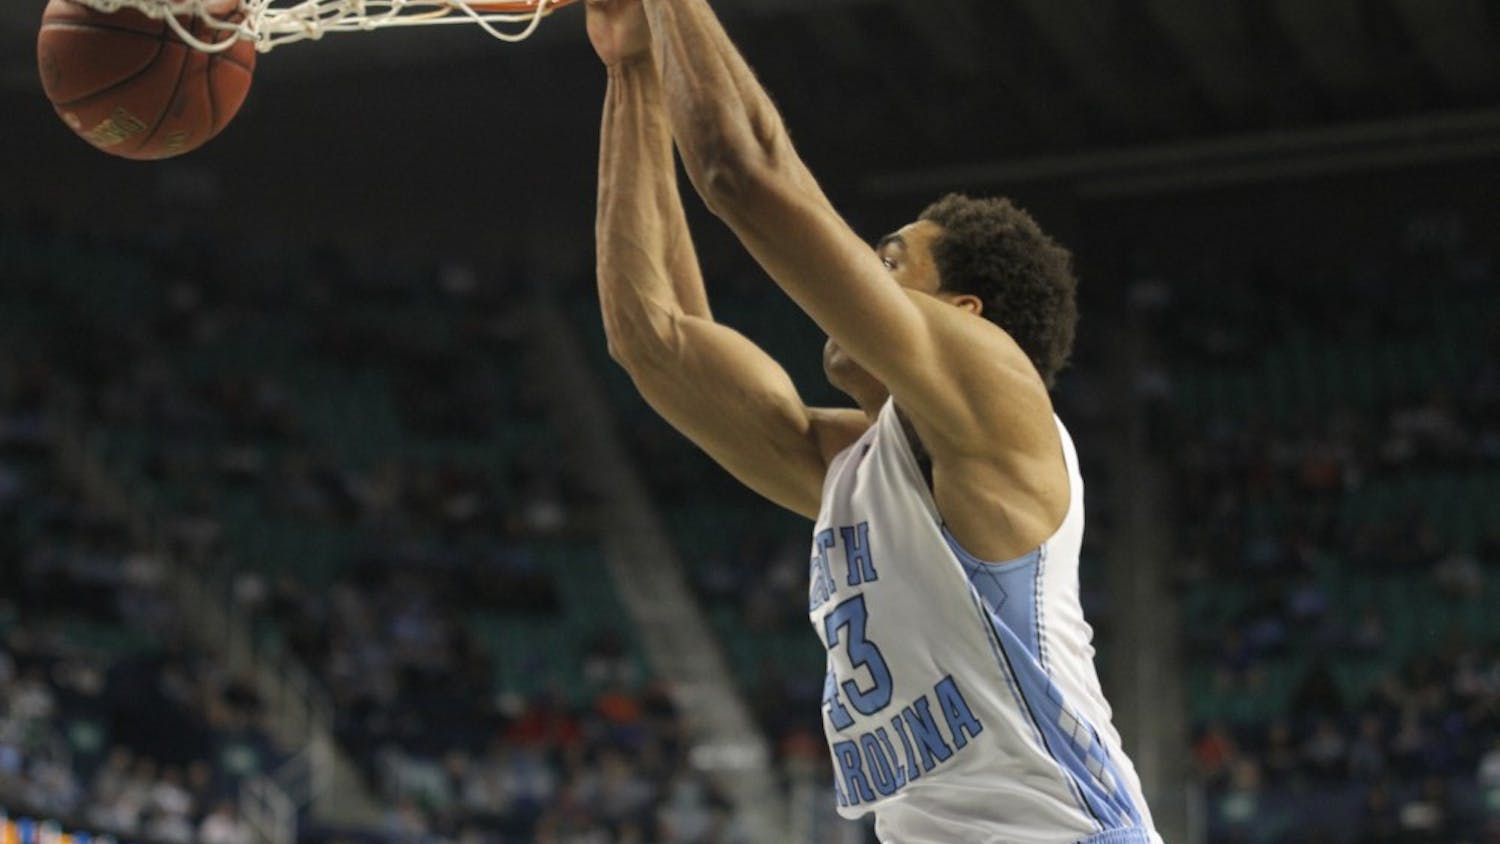 	James Michael McAdoo slams one down. McAdoo was assisted by a bounce pass from Marcus Paige.